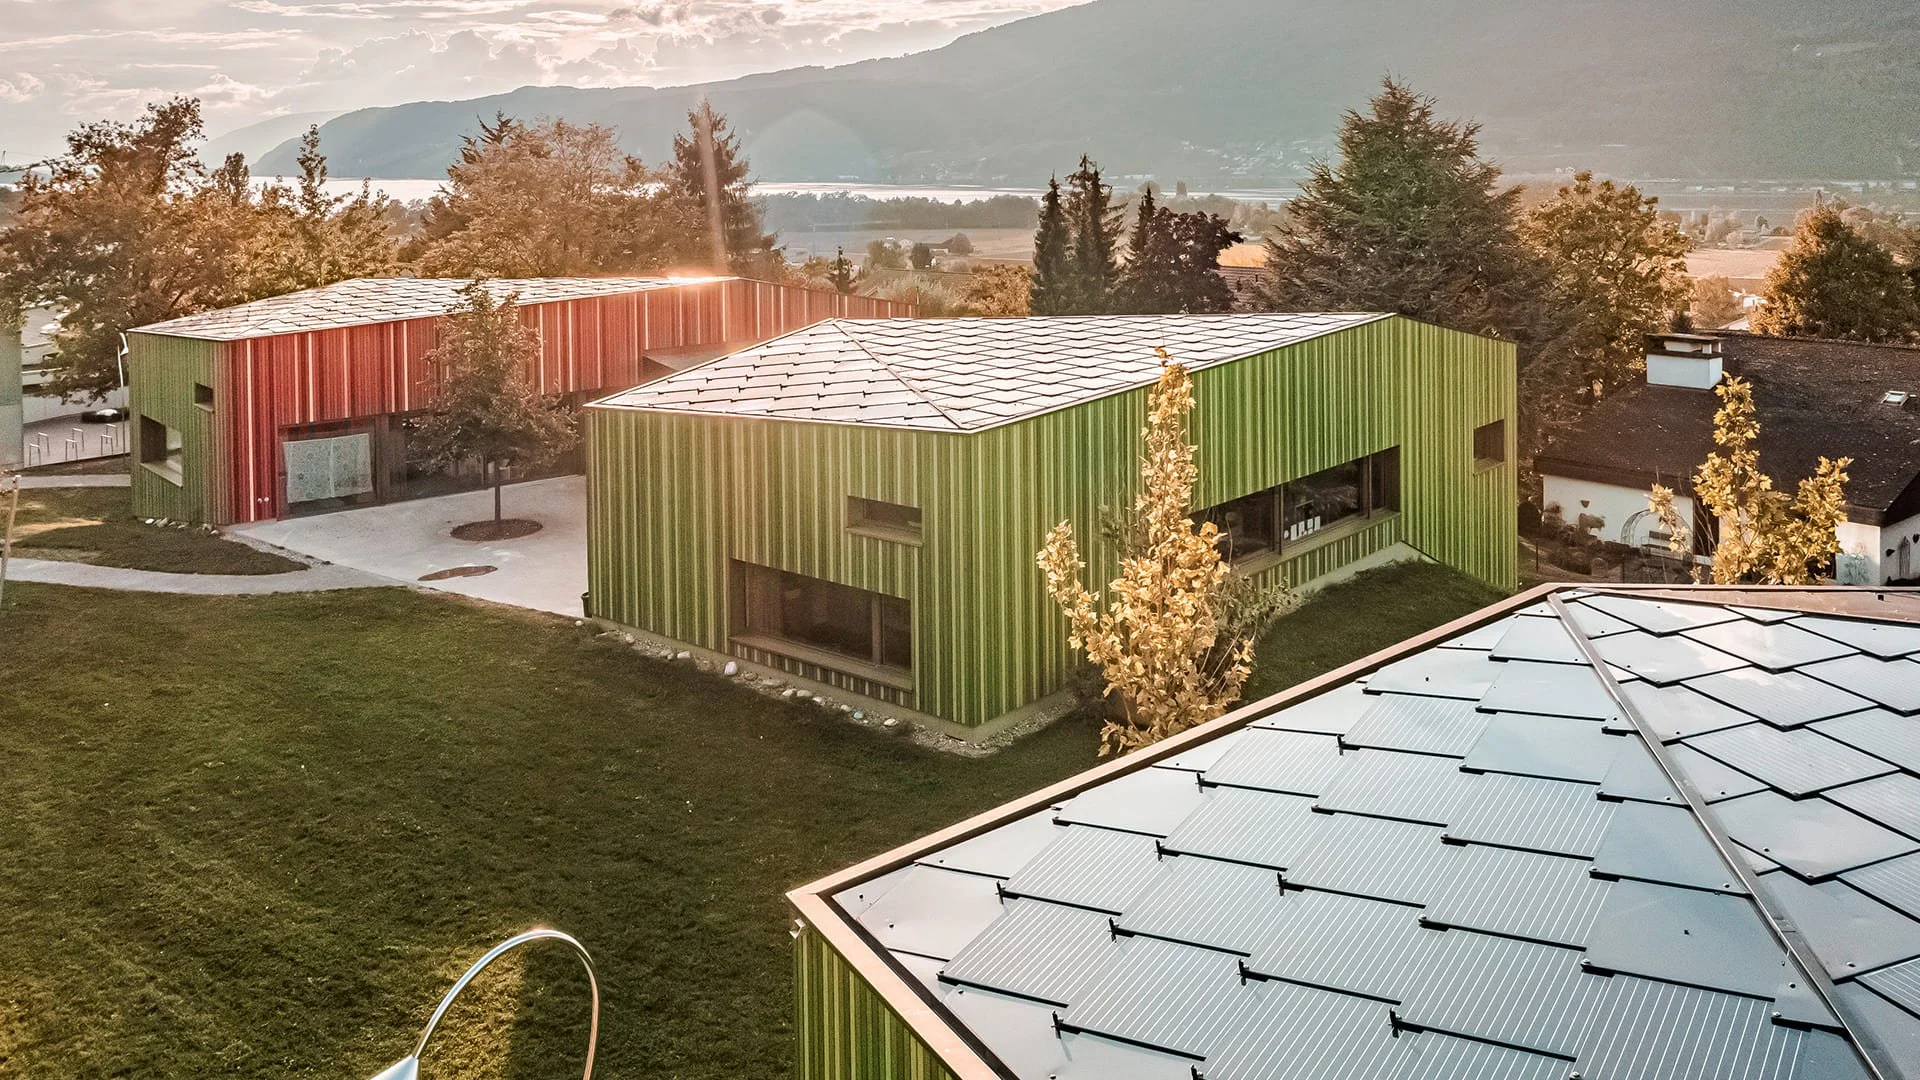 SunStyle solar tiles on a educational campus with low pitch roofs